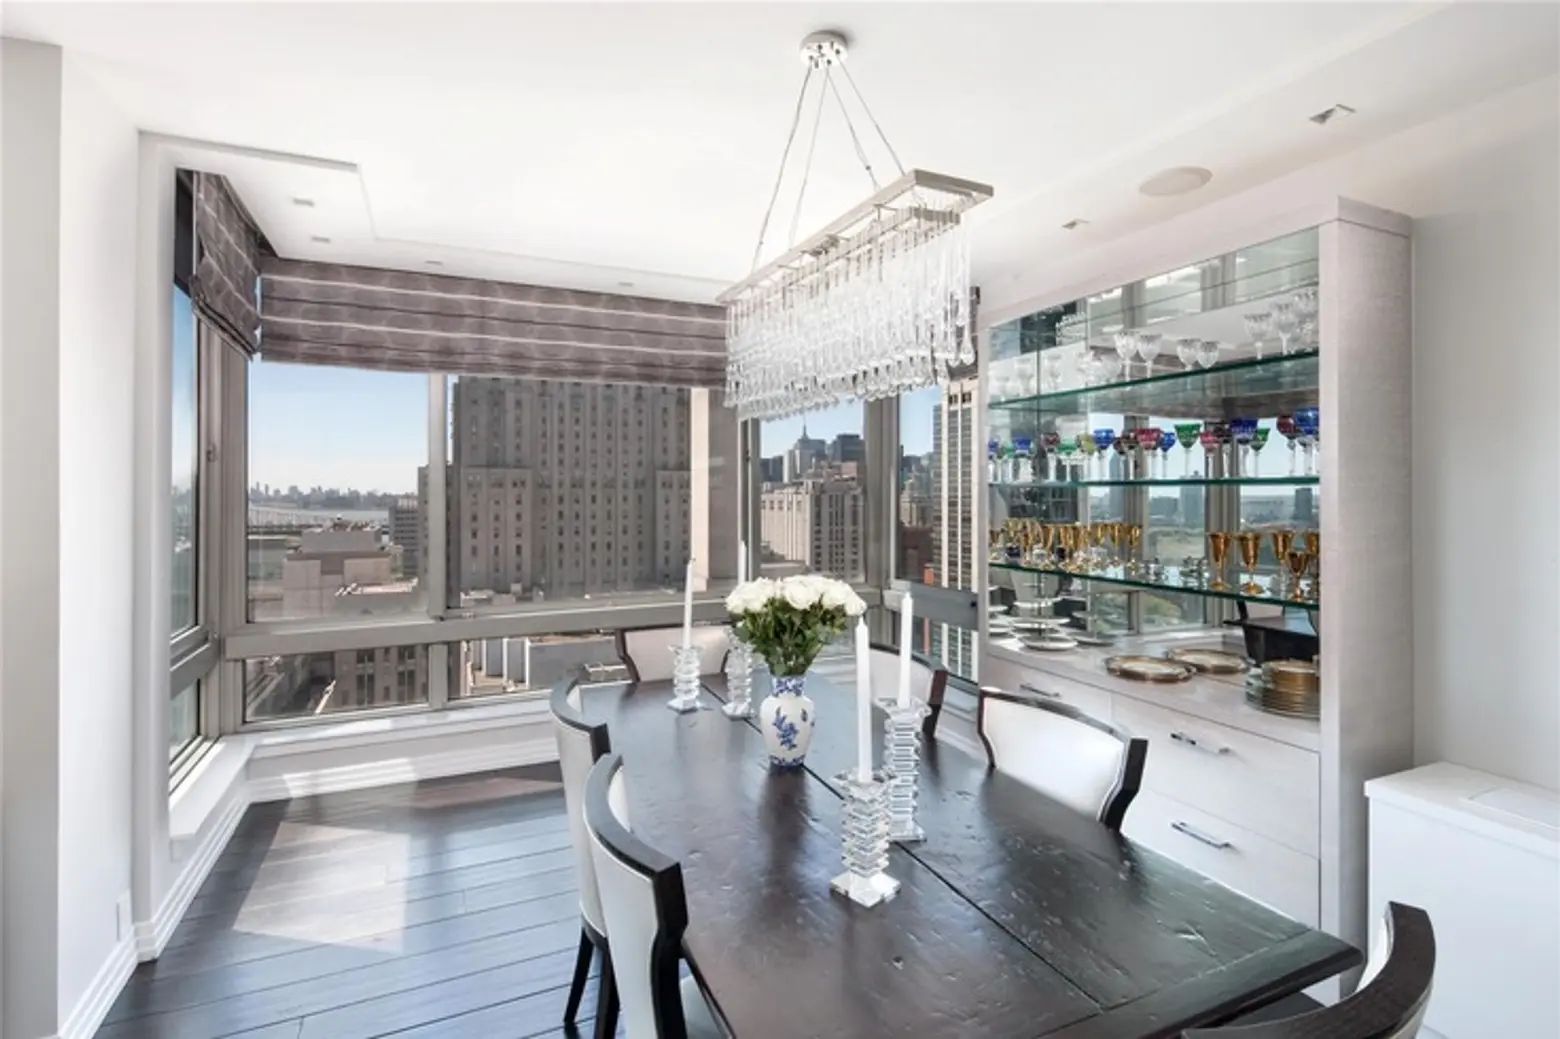 This Belaire Condo in Lenox Hill Will Cure What Ails You